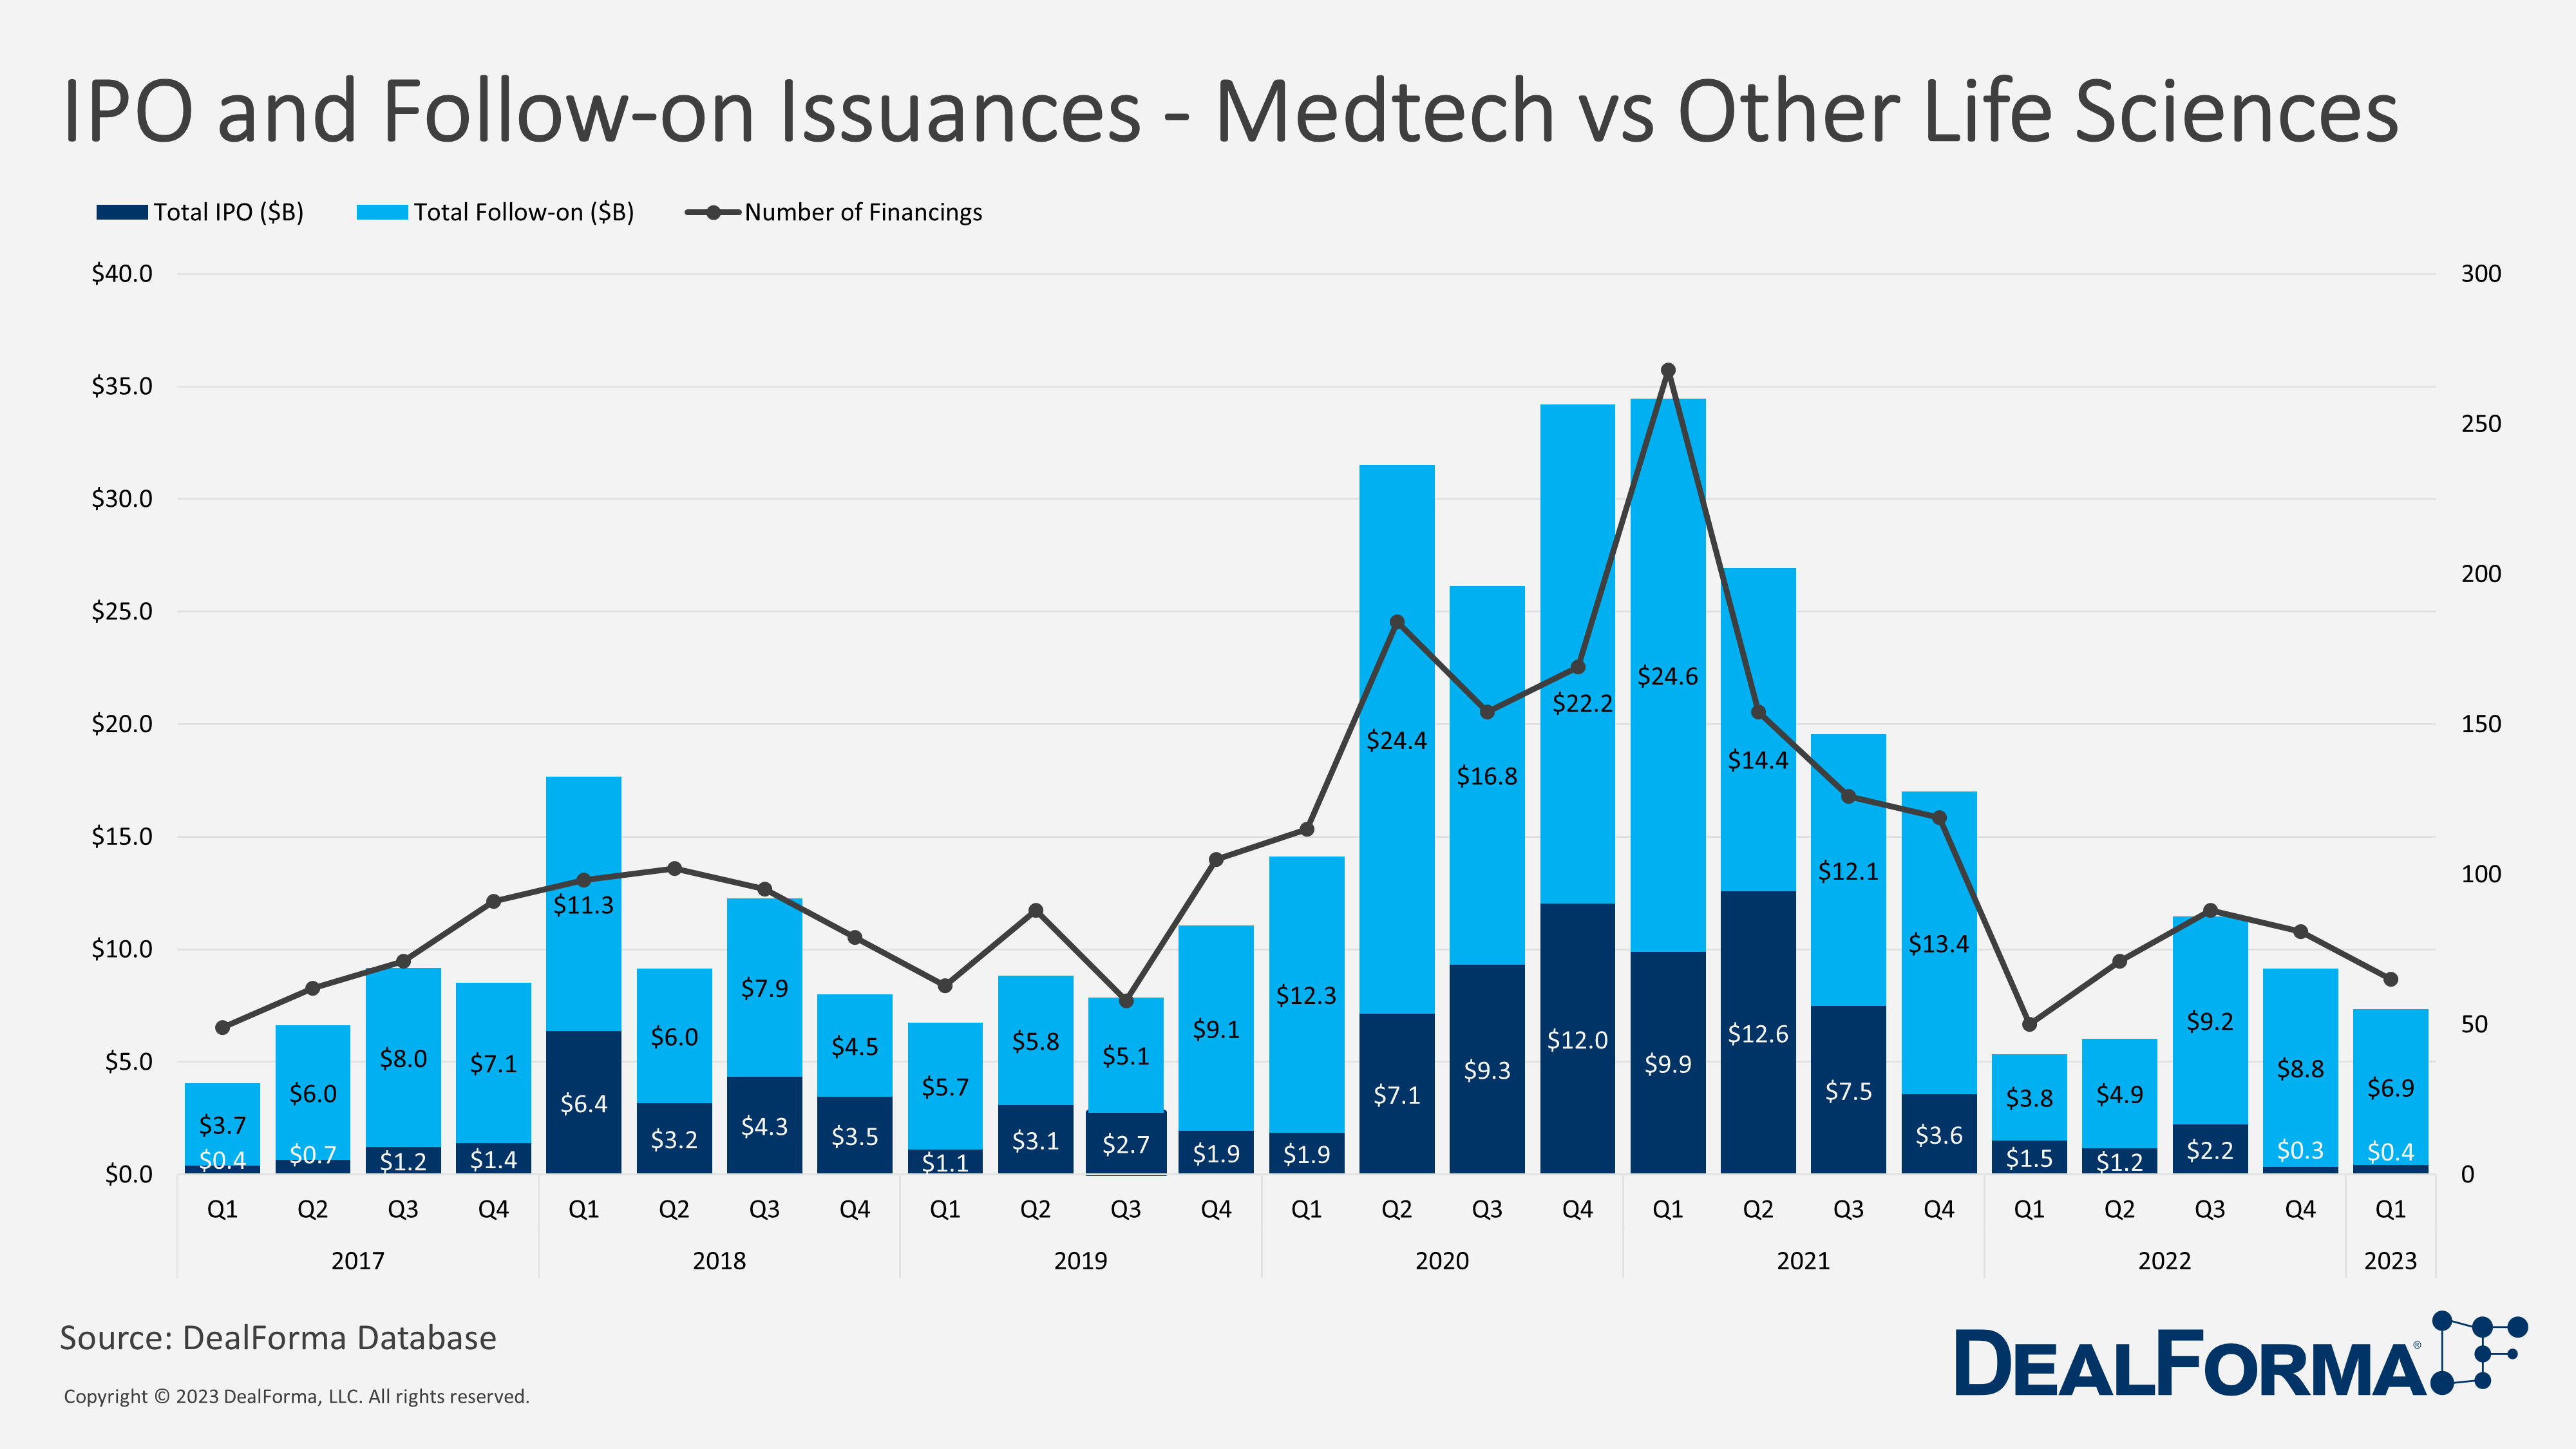 IPO and Follow-on Issuances - Medtech vs Other Life Sciences